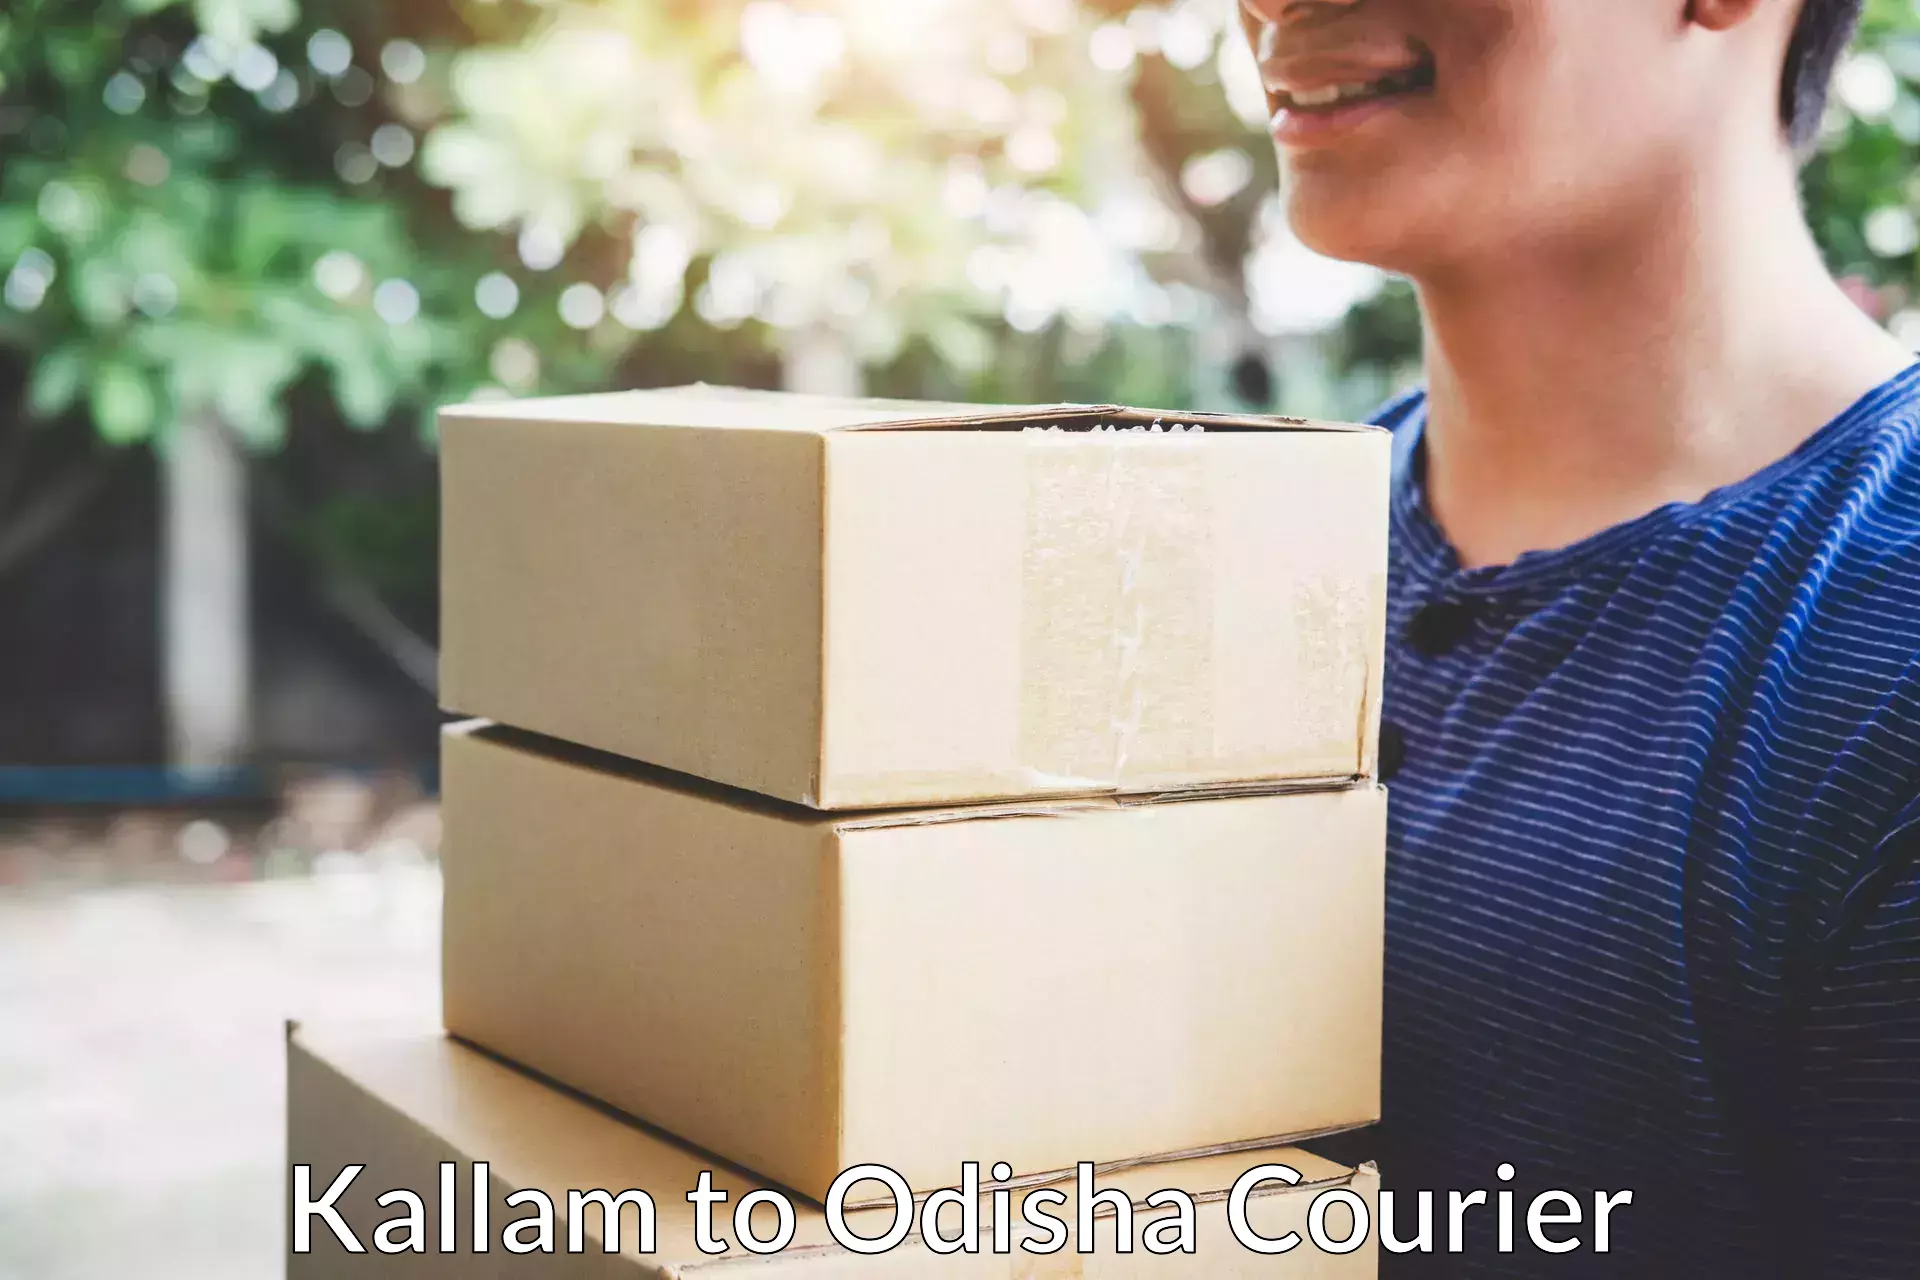 Trusted relocation experts Kallam to Komana